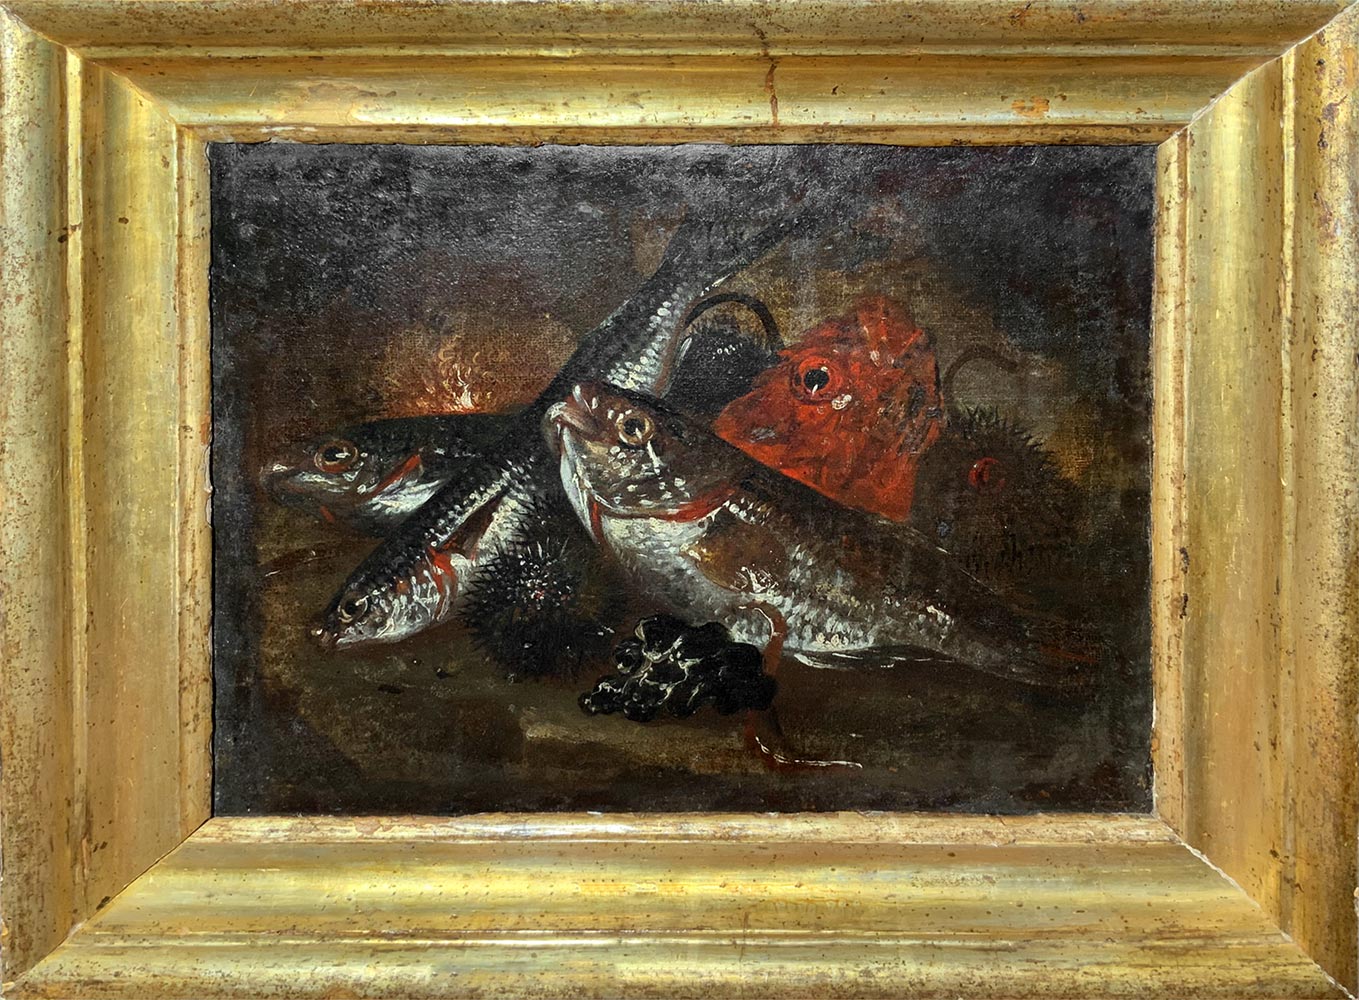 Oil painting on canvas. Giuseppe Recco (Naples, 1634 - Milan, 1695), Still life of fish. 67x67